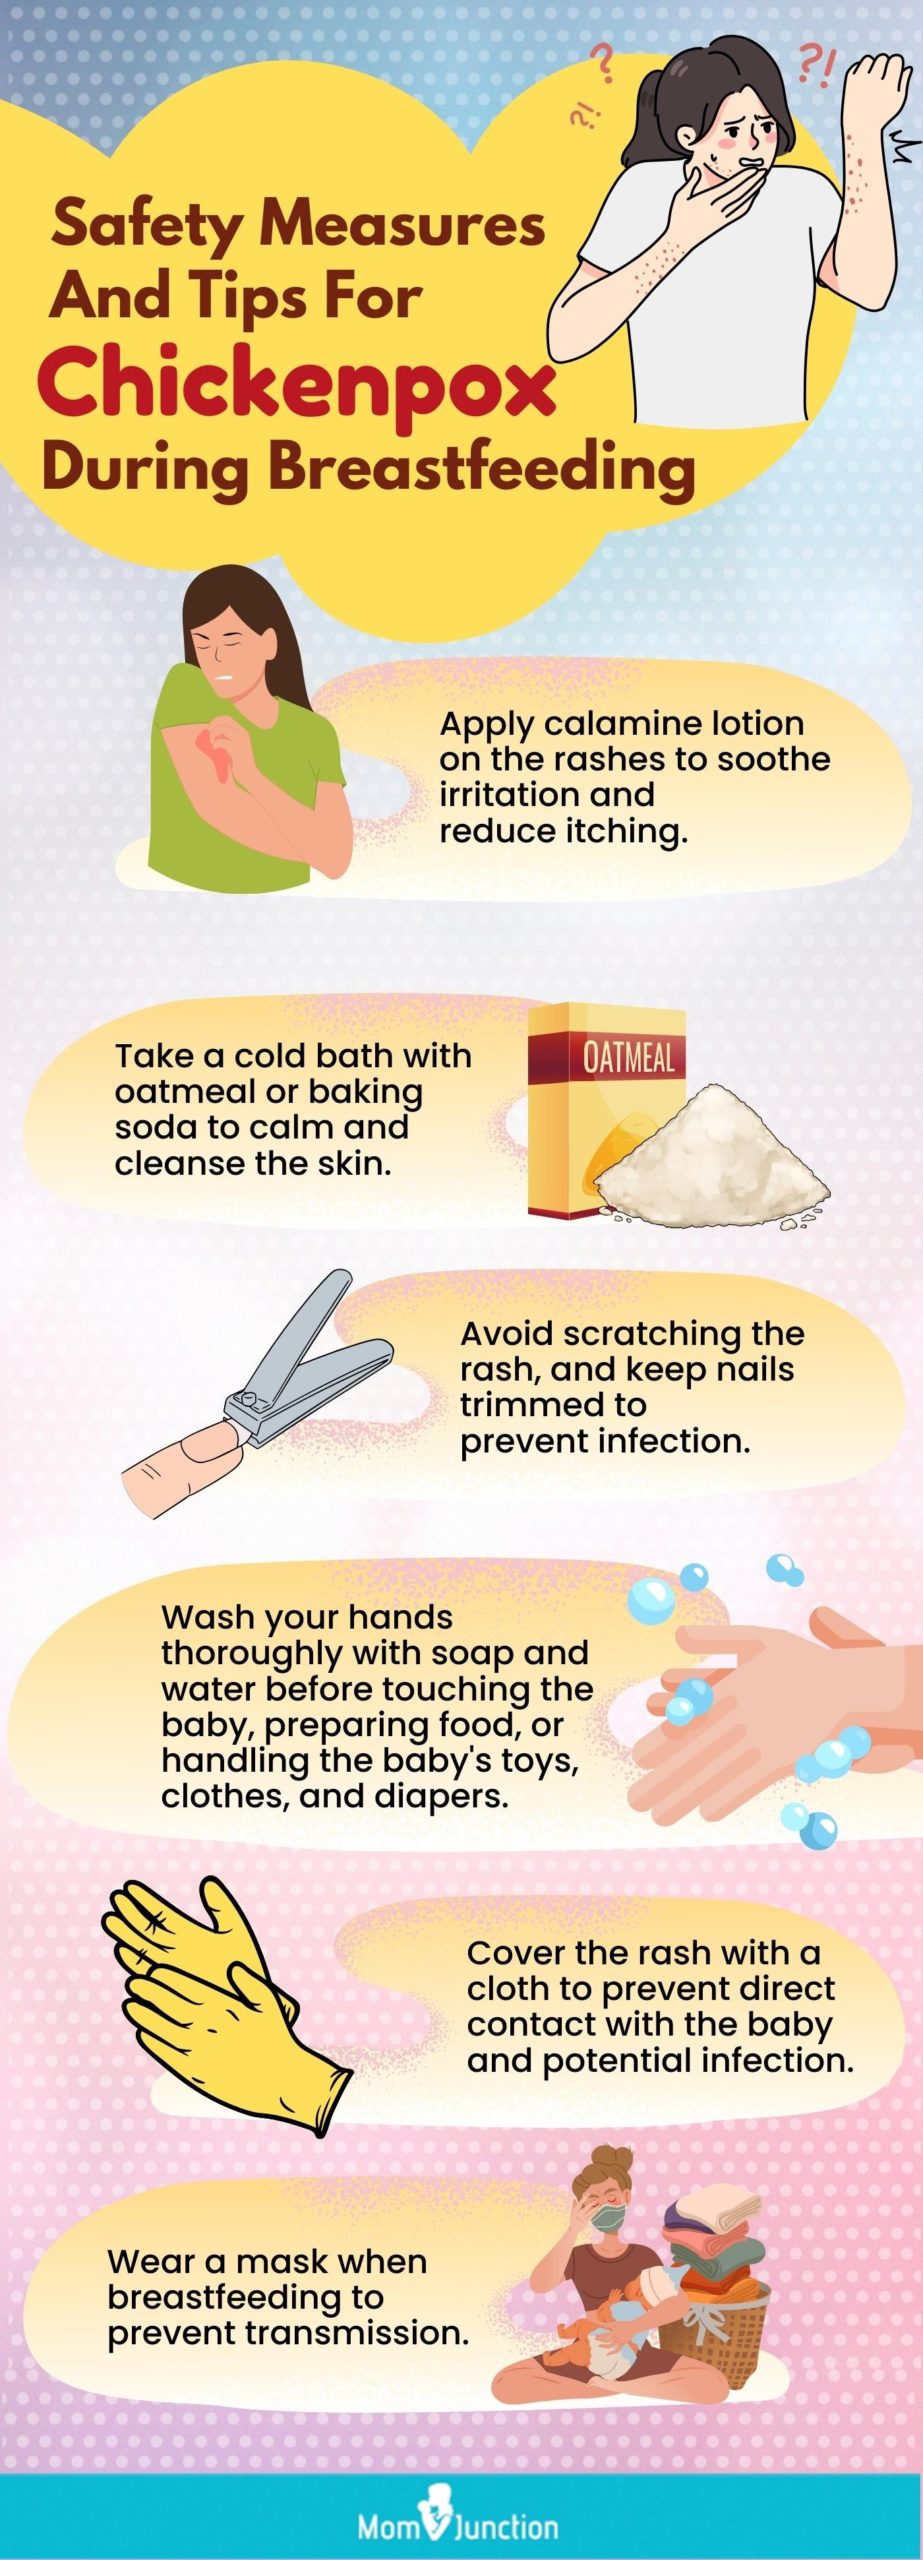 safety measures and tips for chickenpox during breastfeeding [infographic]